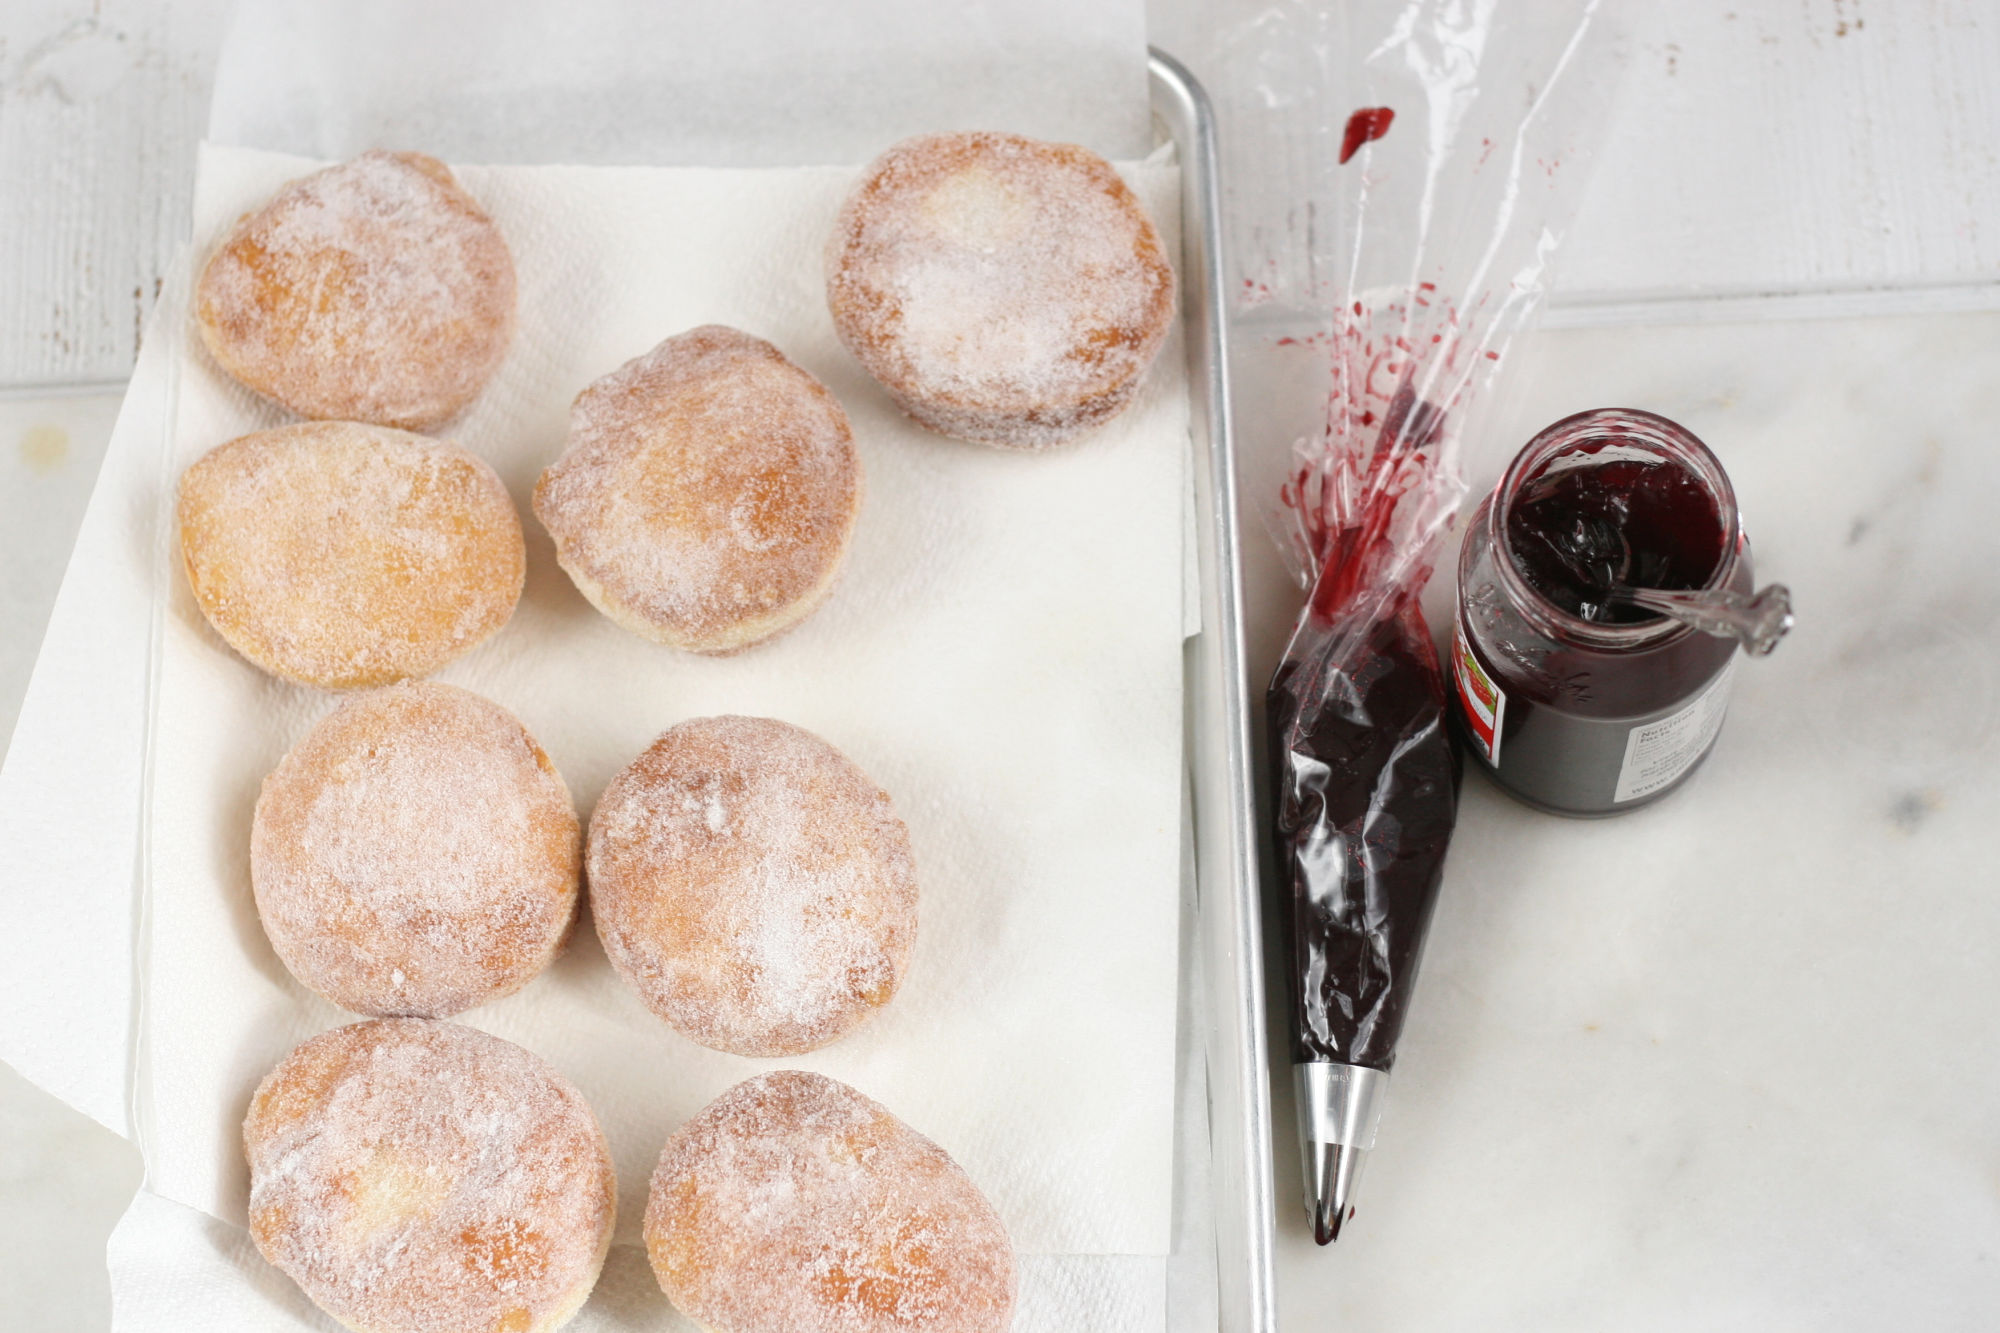 filling homemade donuts with raspberry jam.